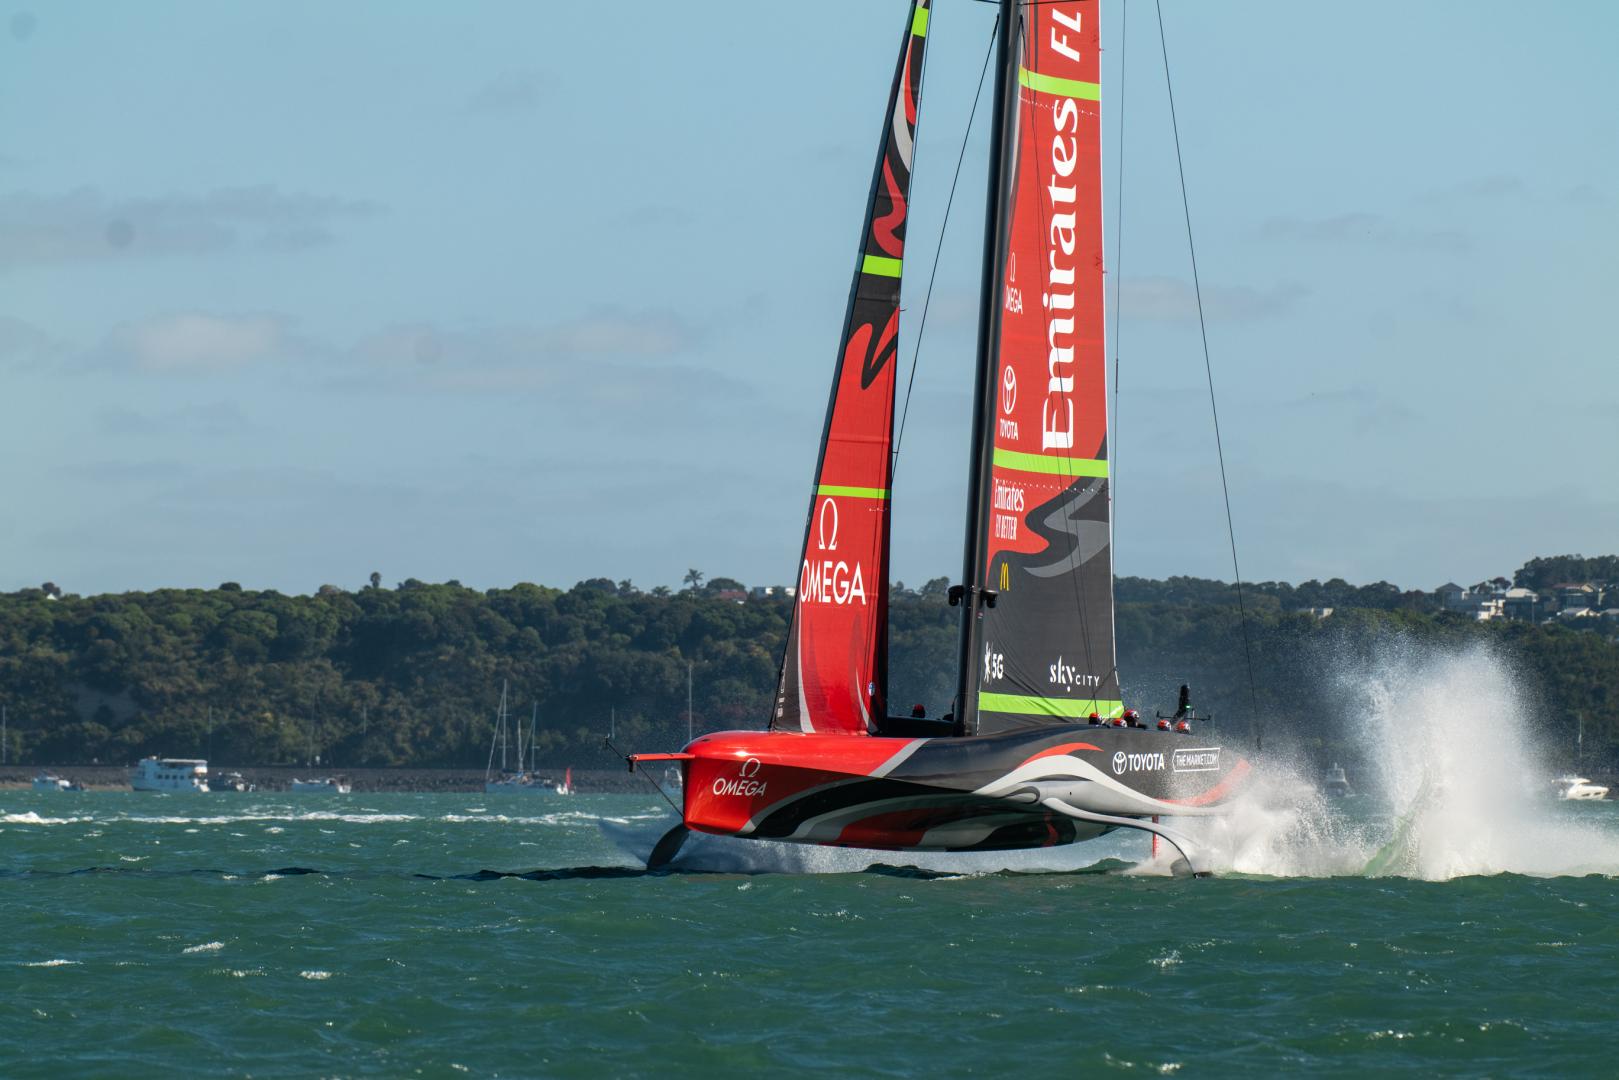 1 & 1 for Emirates Team New Zealand on day 1